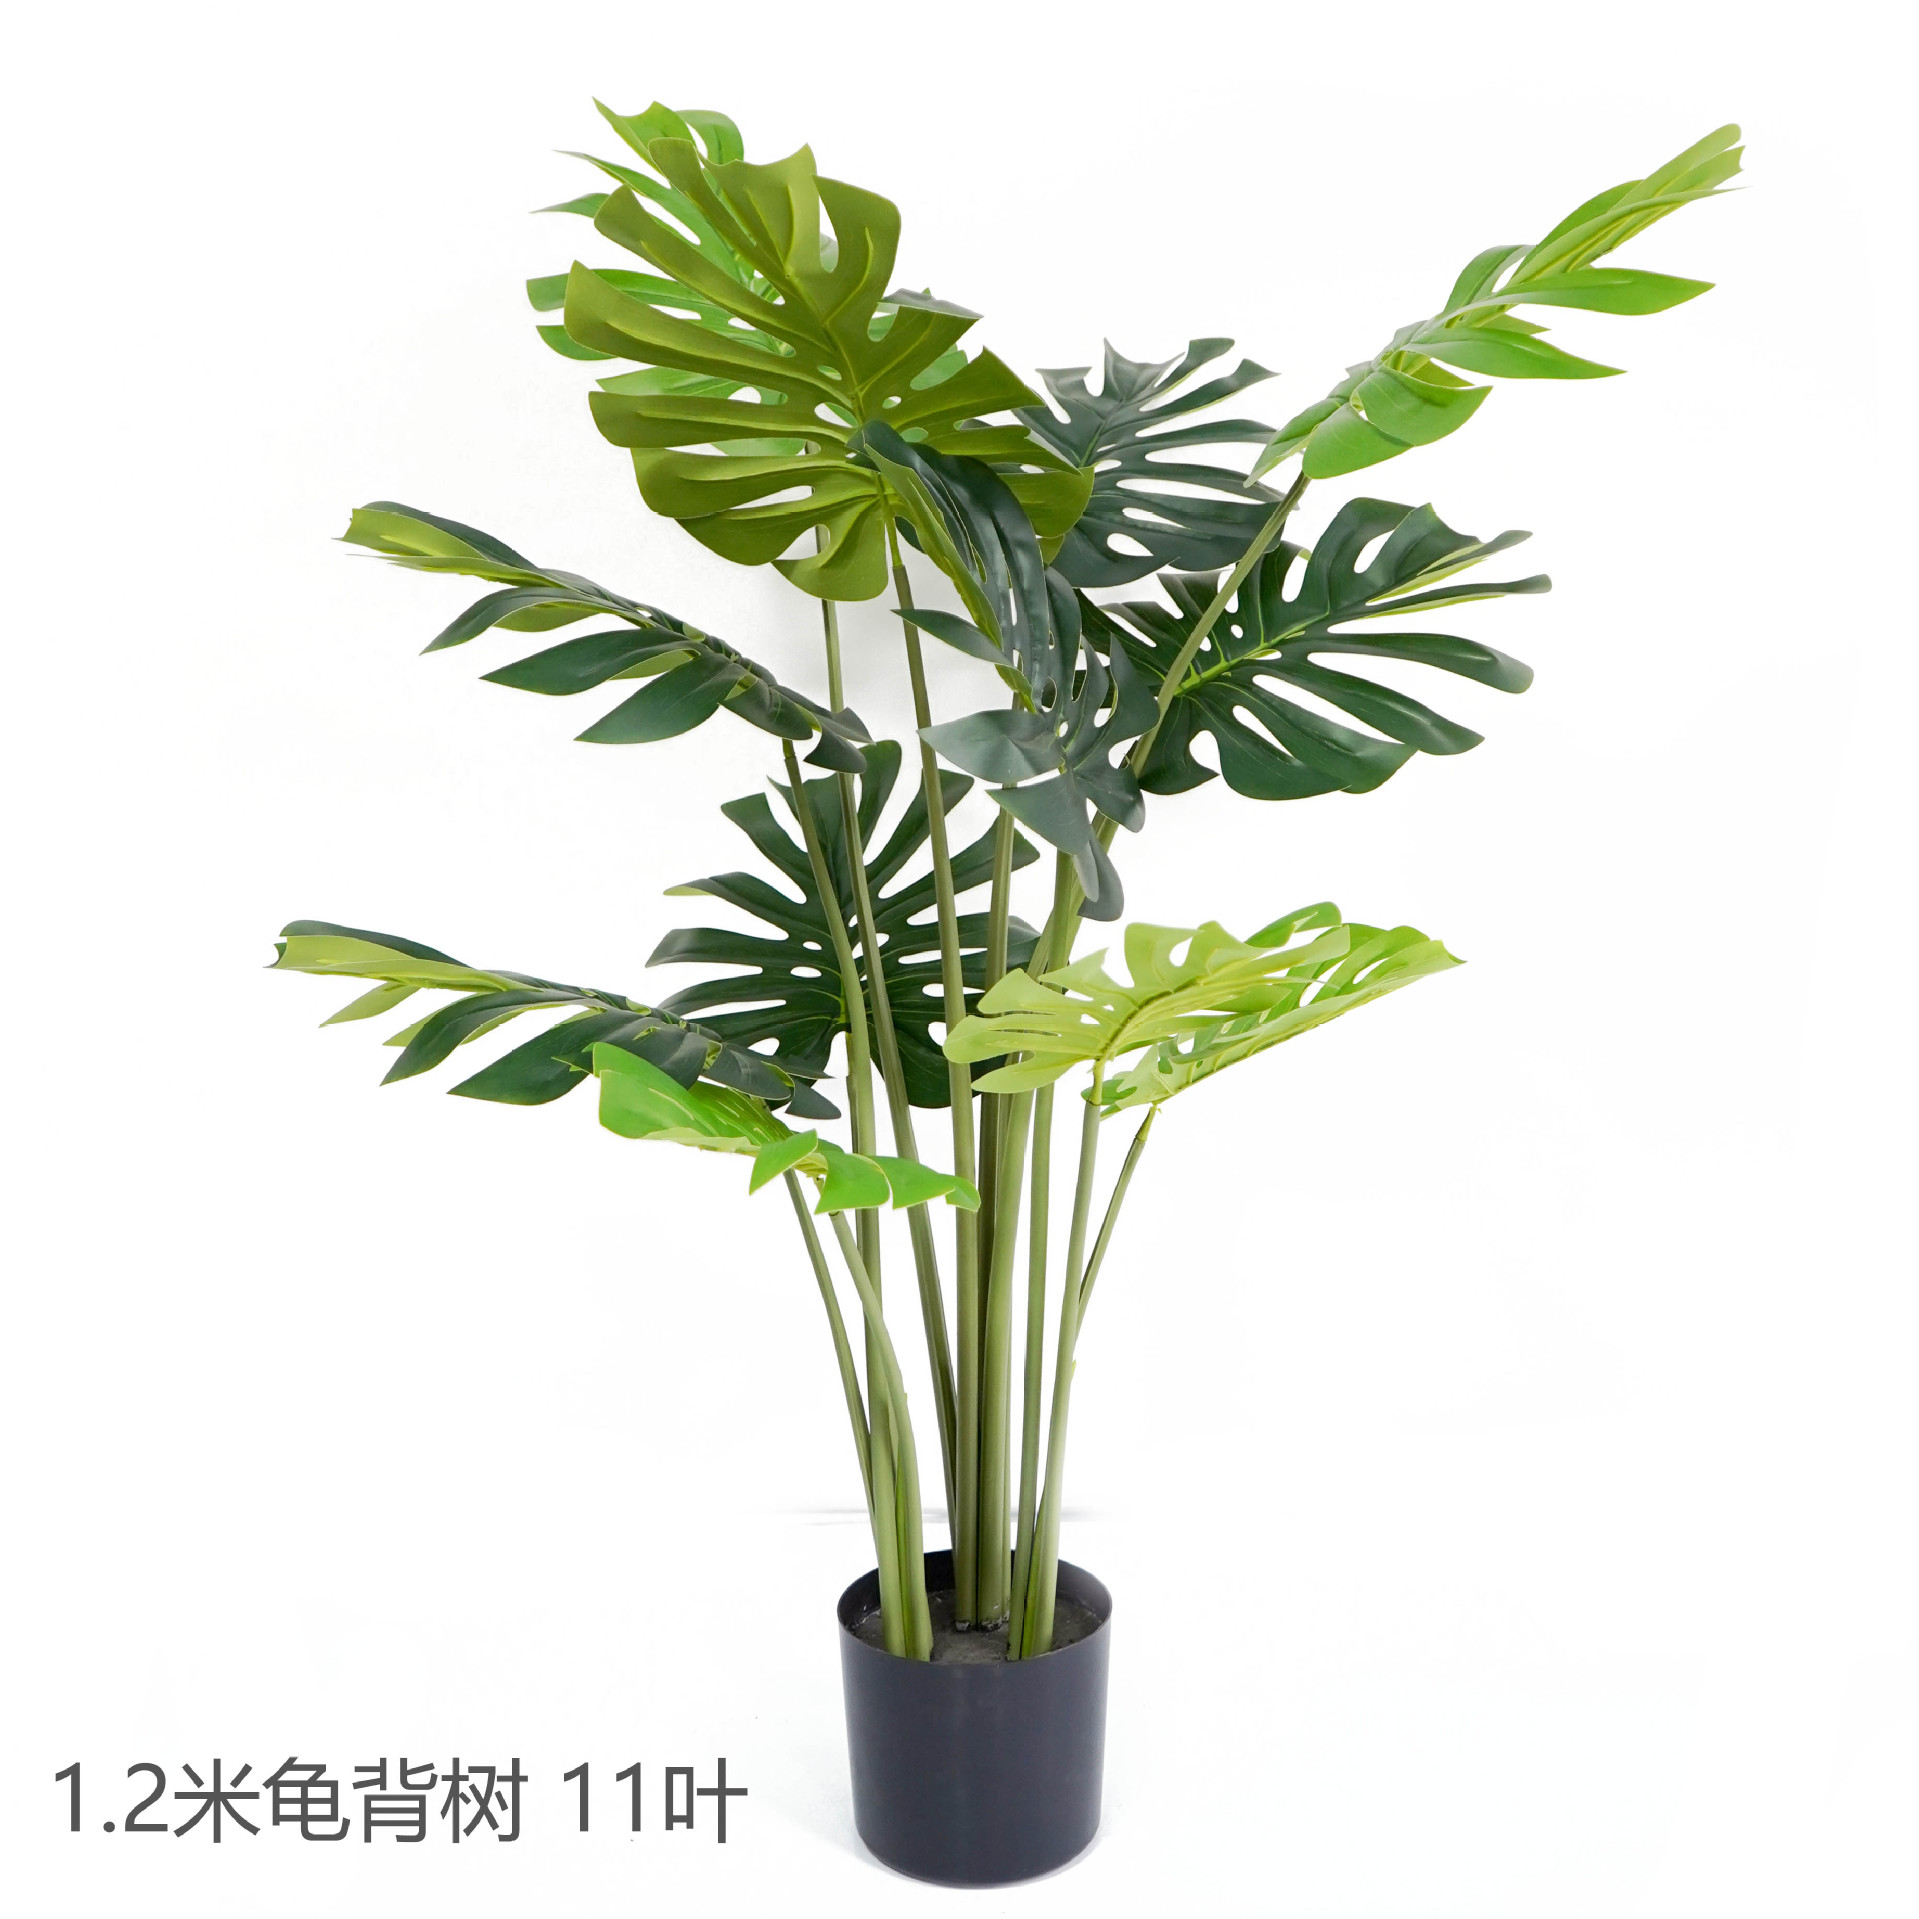 Simulation Turtle Back Tree Potted Indoor Living Room Fake Tree Decoration Ornaments Simulation Turtle Back Bamboo Artificial Plant Bonsai